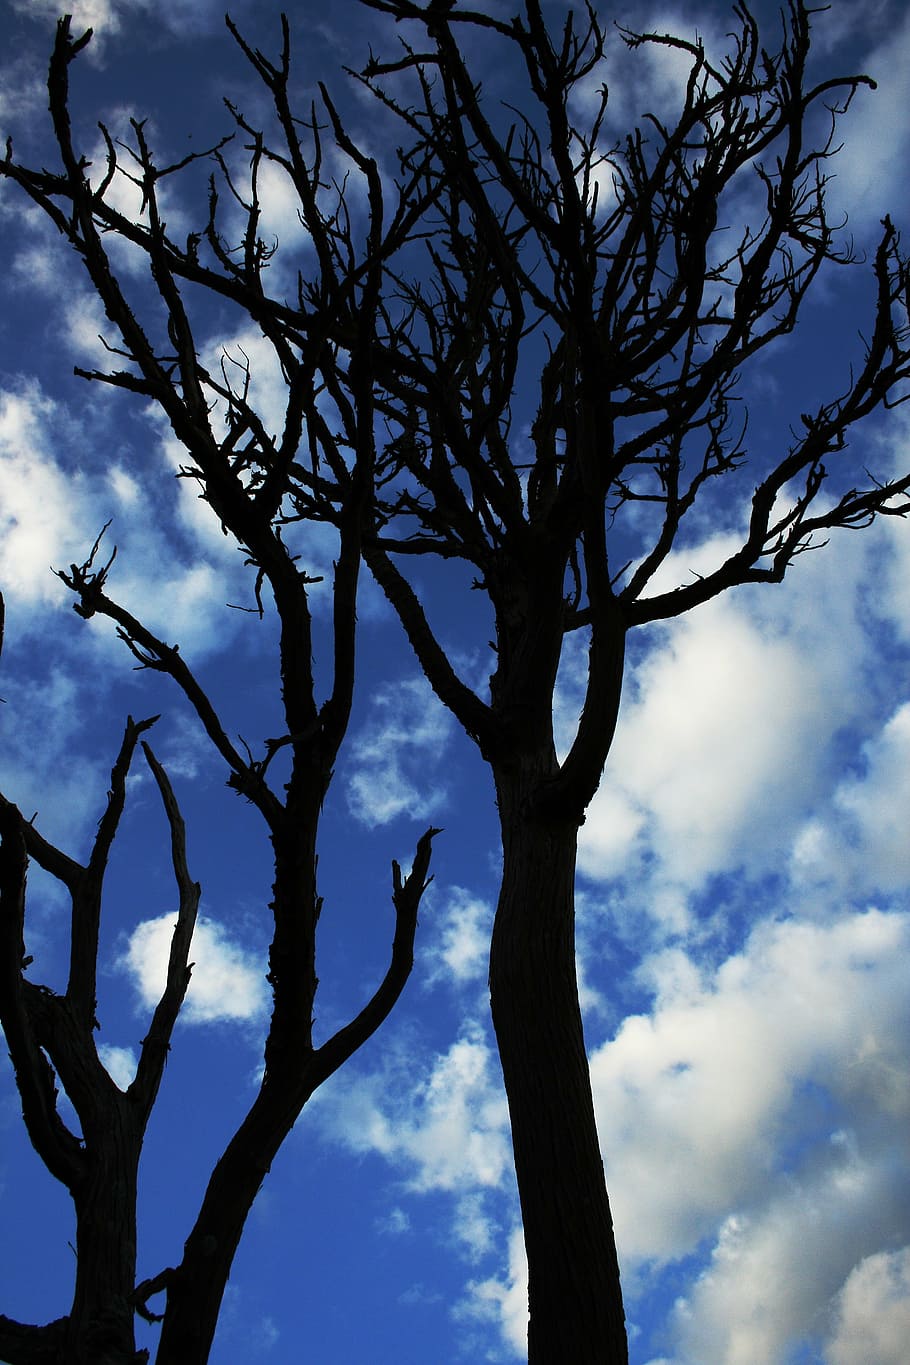 silhouette, withered, tree, blue, cloudy, sky, daytime, landscape, clouds, dry tree